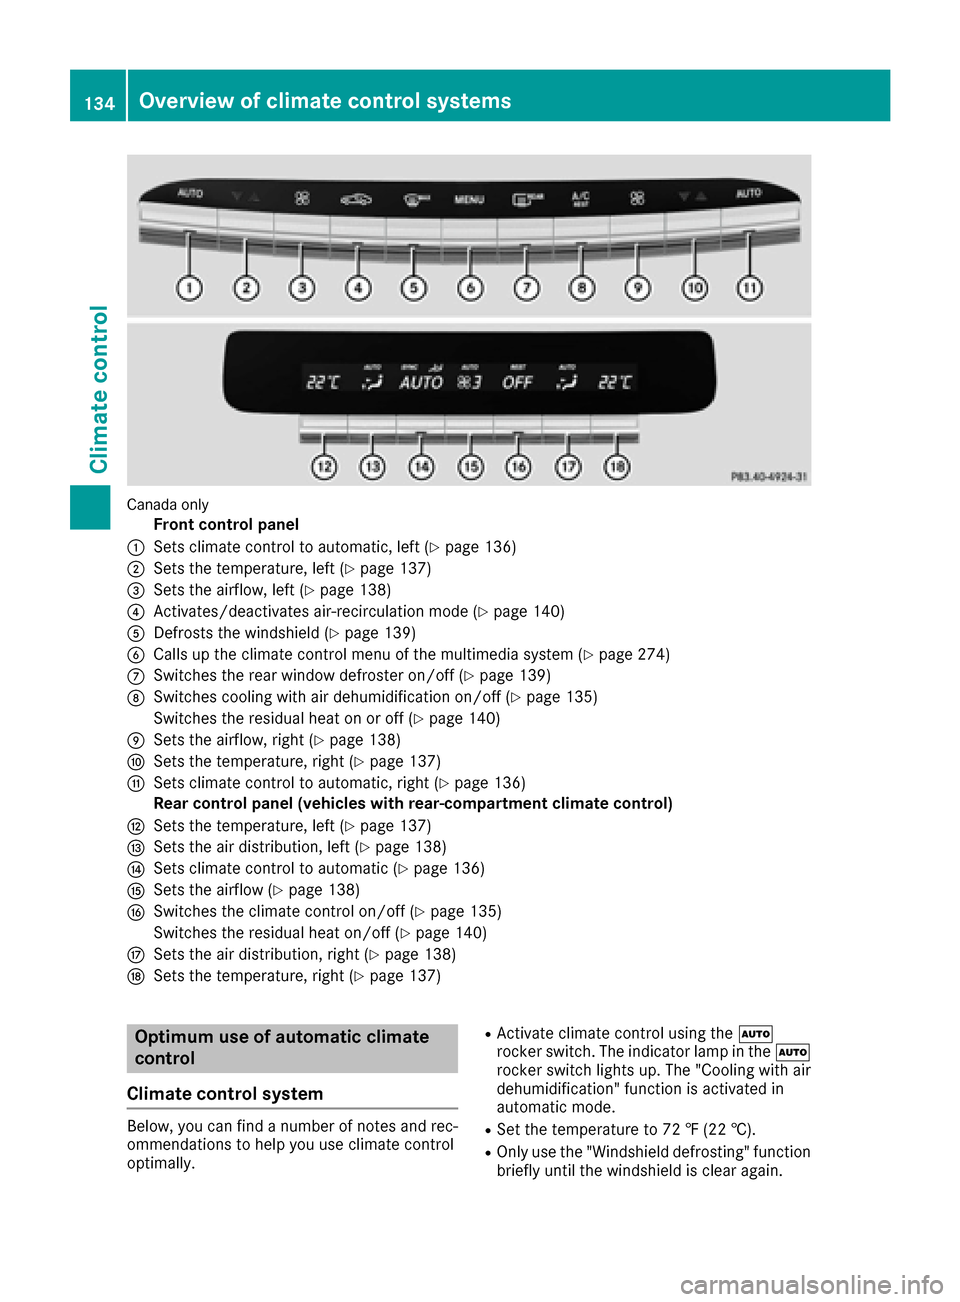 MERCEDES-BENZ S-Class MAYBACH 2017 W222 Owners Manual Canada only
Front control panel
:Sets climate control to automatic, left (Ypage 136)
;Sets the temperature, left (Ypage 137)
=Sets the airflow, left (Ypage 138)
?Activates/deactivates air-recirculatio